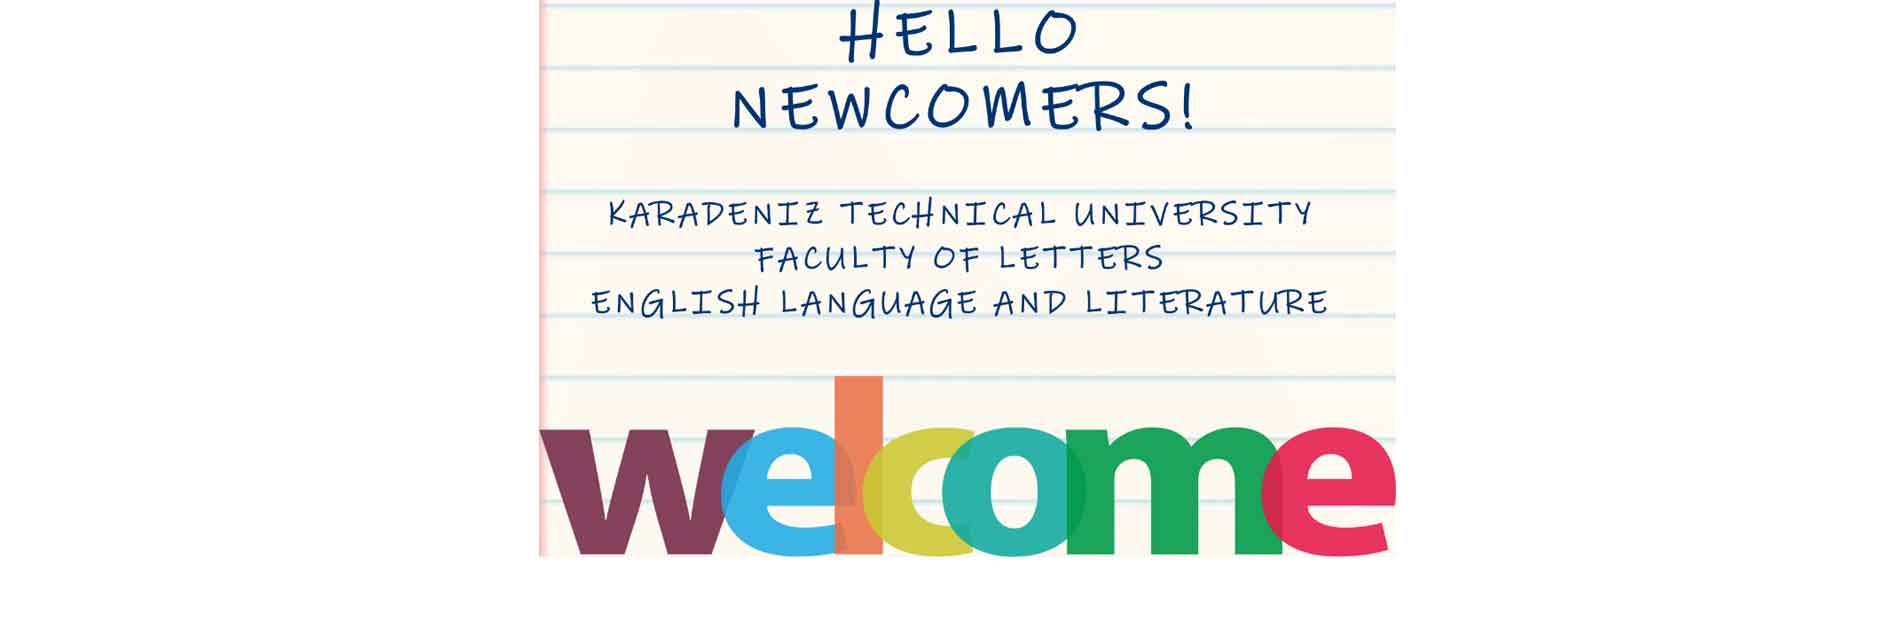 welcome newcomers